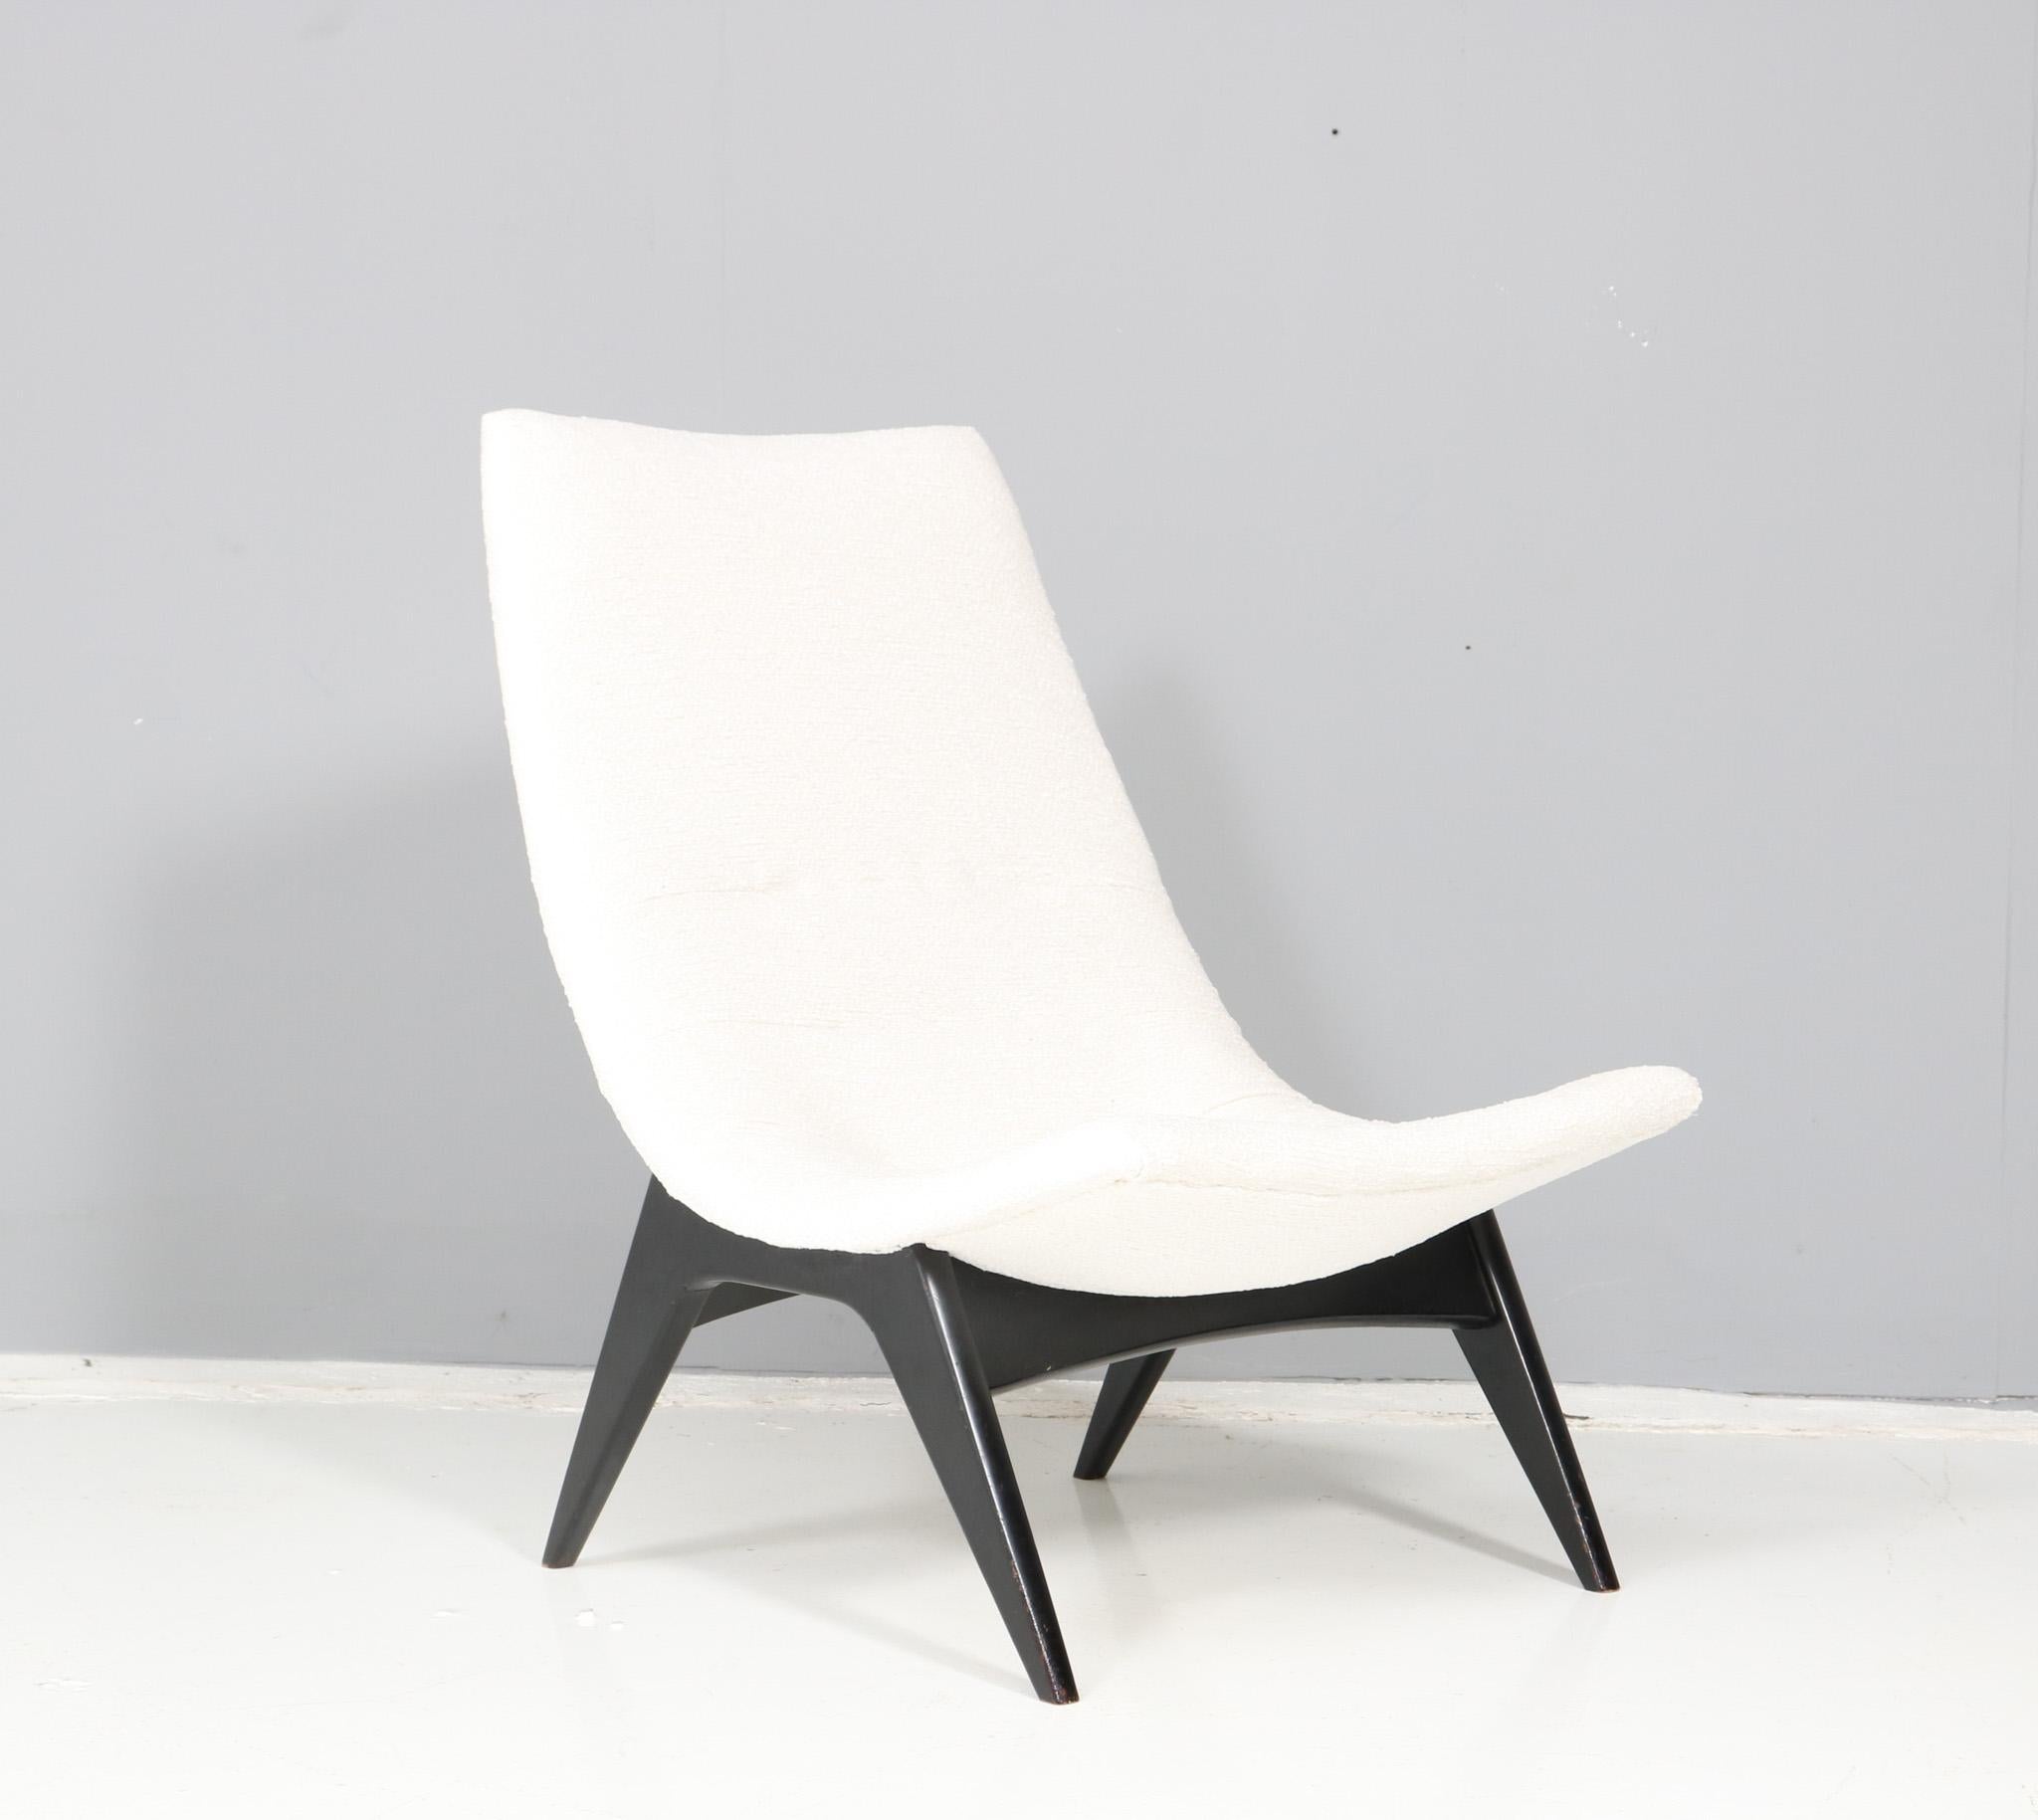 Lacquered Mid-Century Modern Fatölj Nr. 755 Lounge Chair by Svante Skogh for Olof Persons For Sale